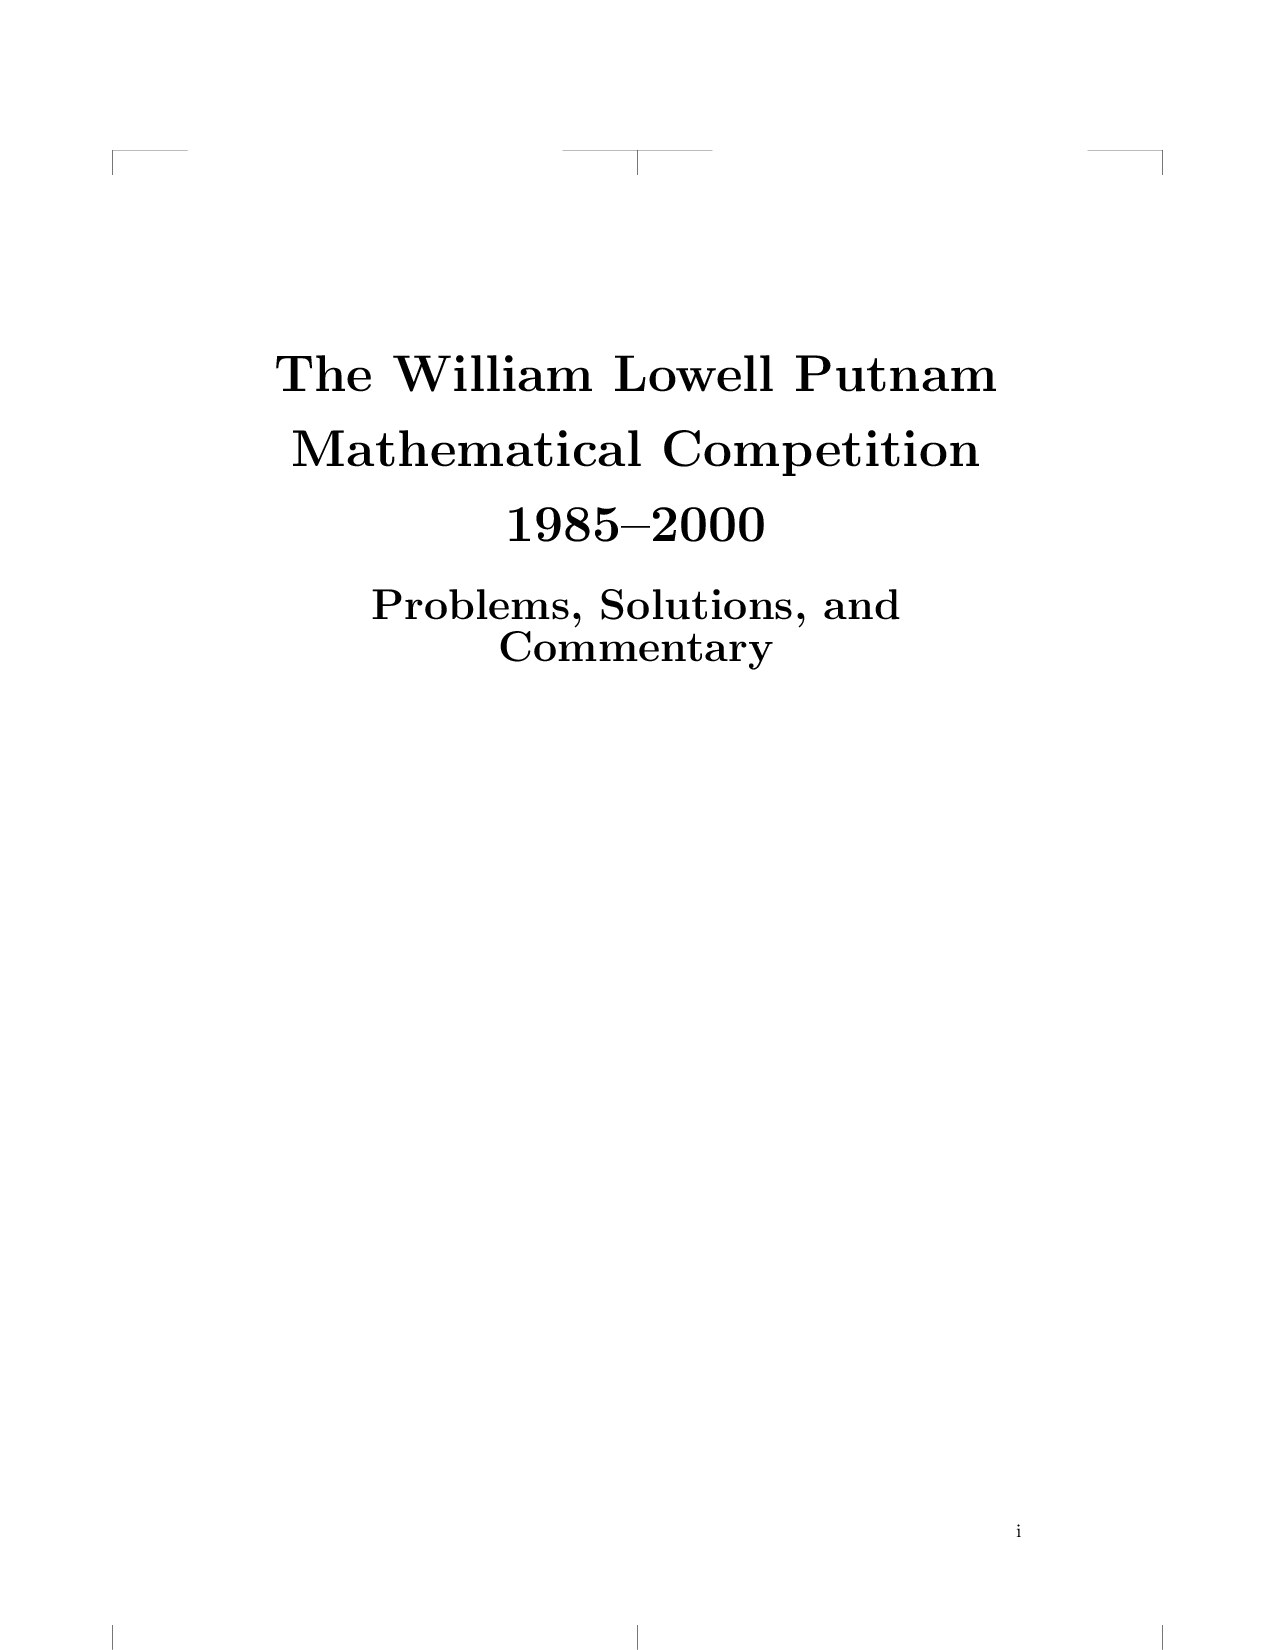 The William Lowell Putnam Competition (1985 - 2000)